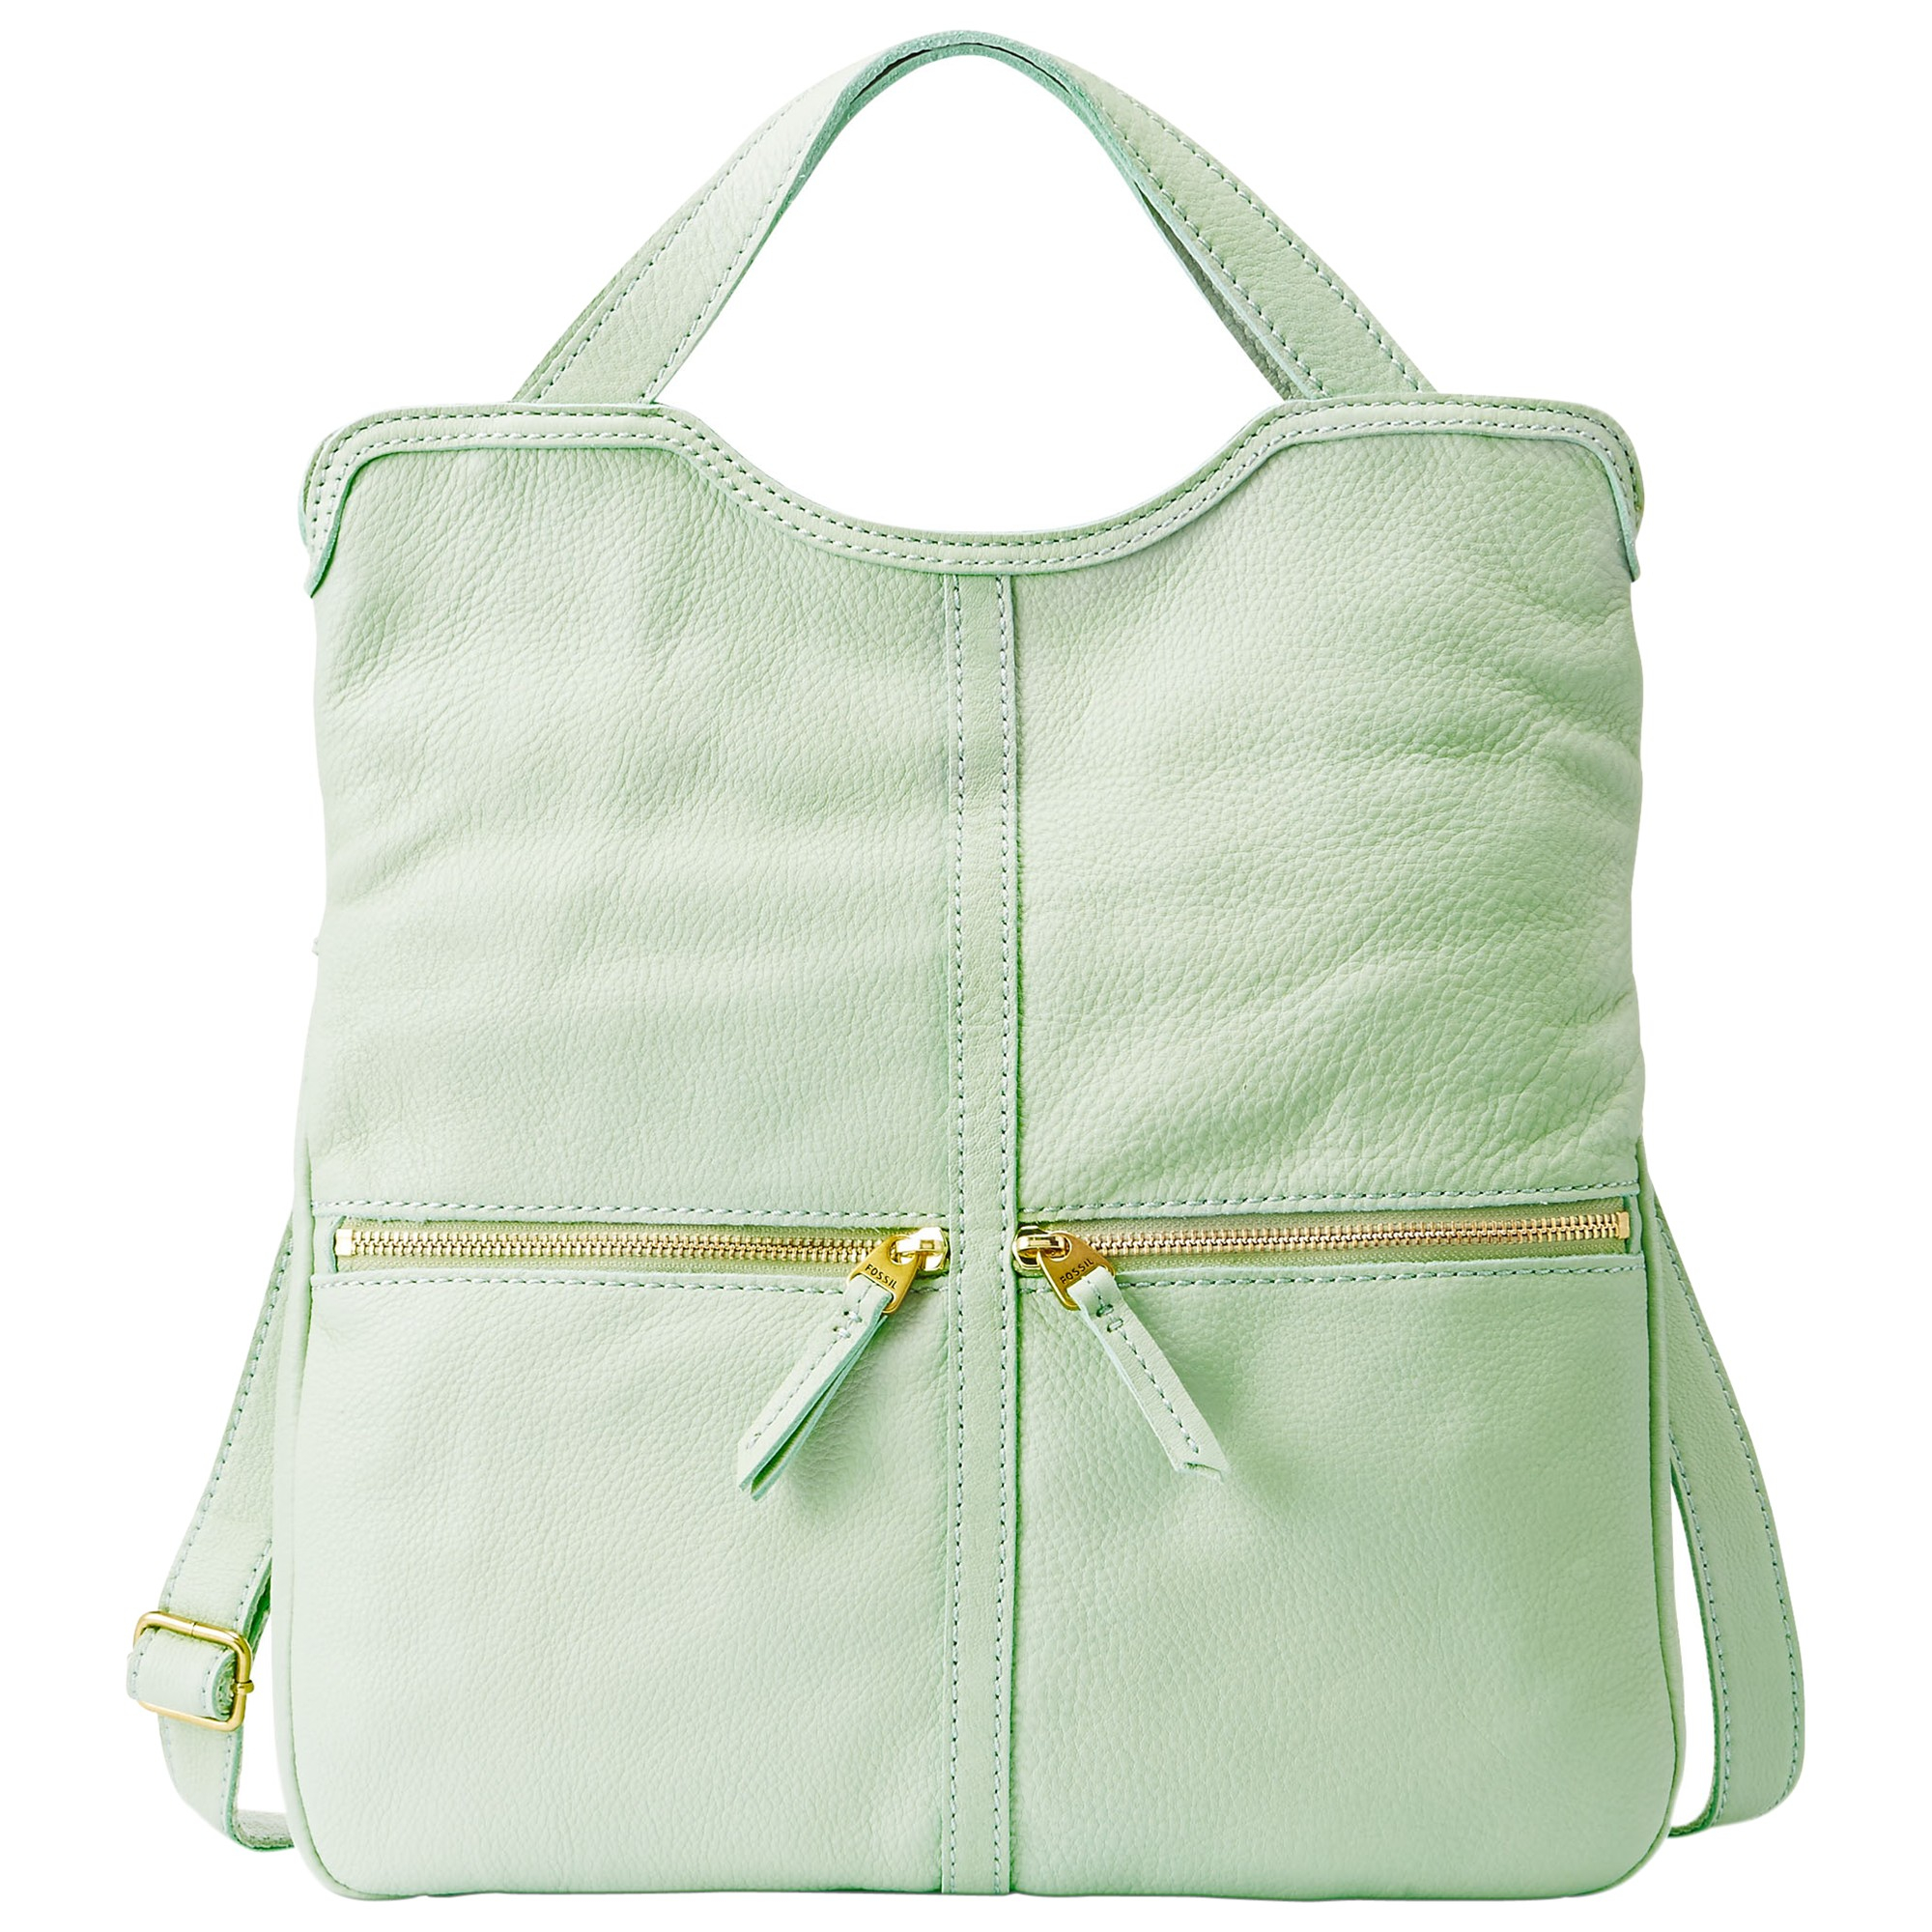 Fossil Erin Fold Over Tote Bag in Green (Pastel Green) | Lyst